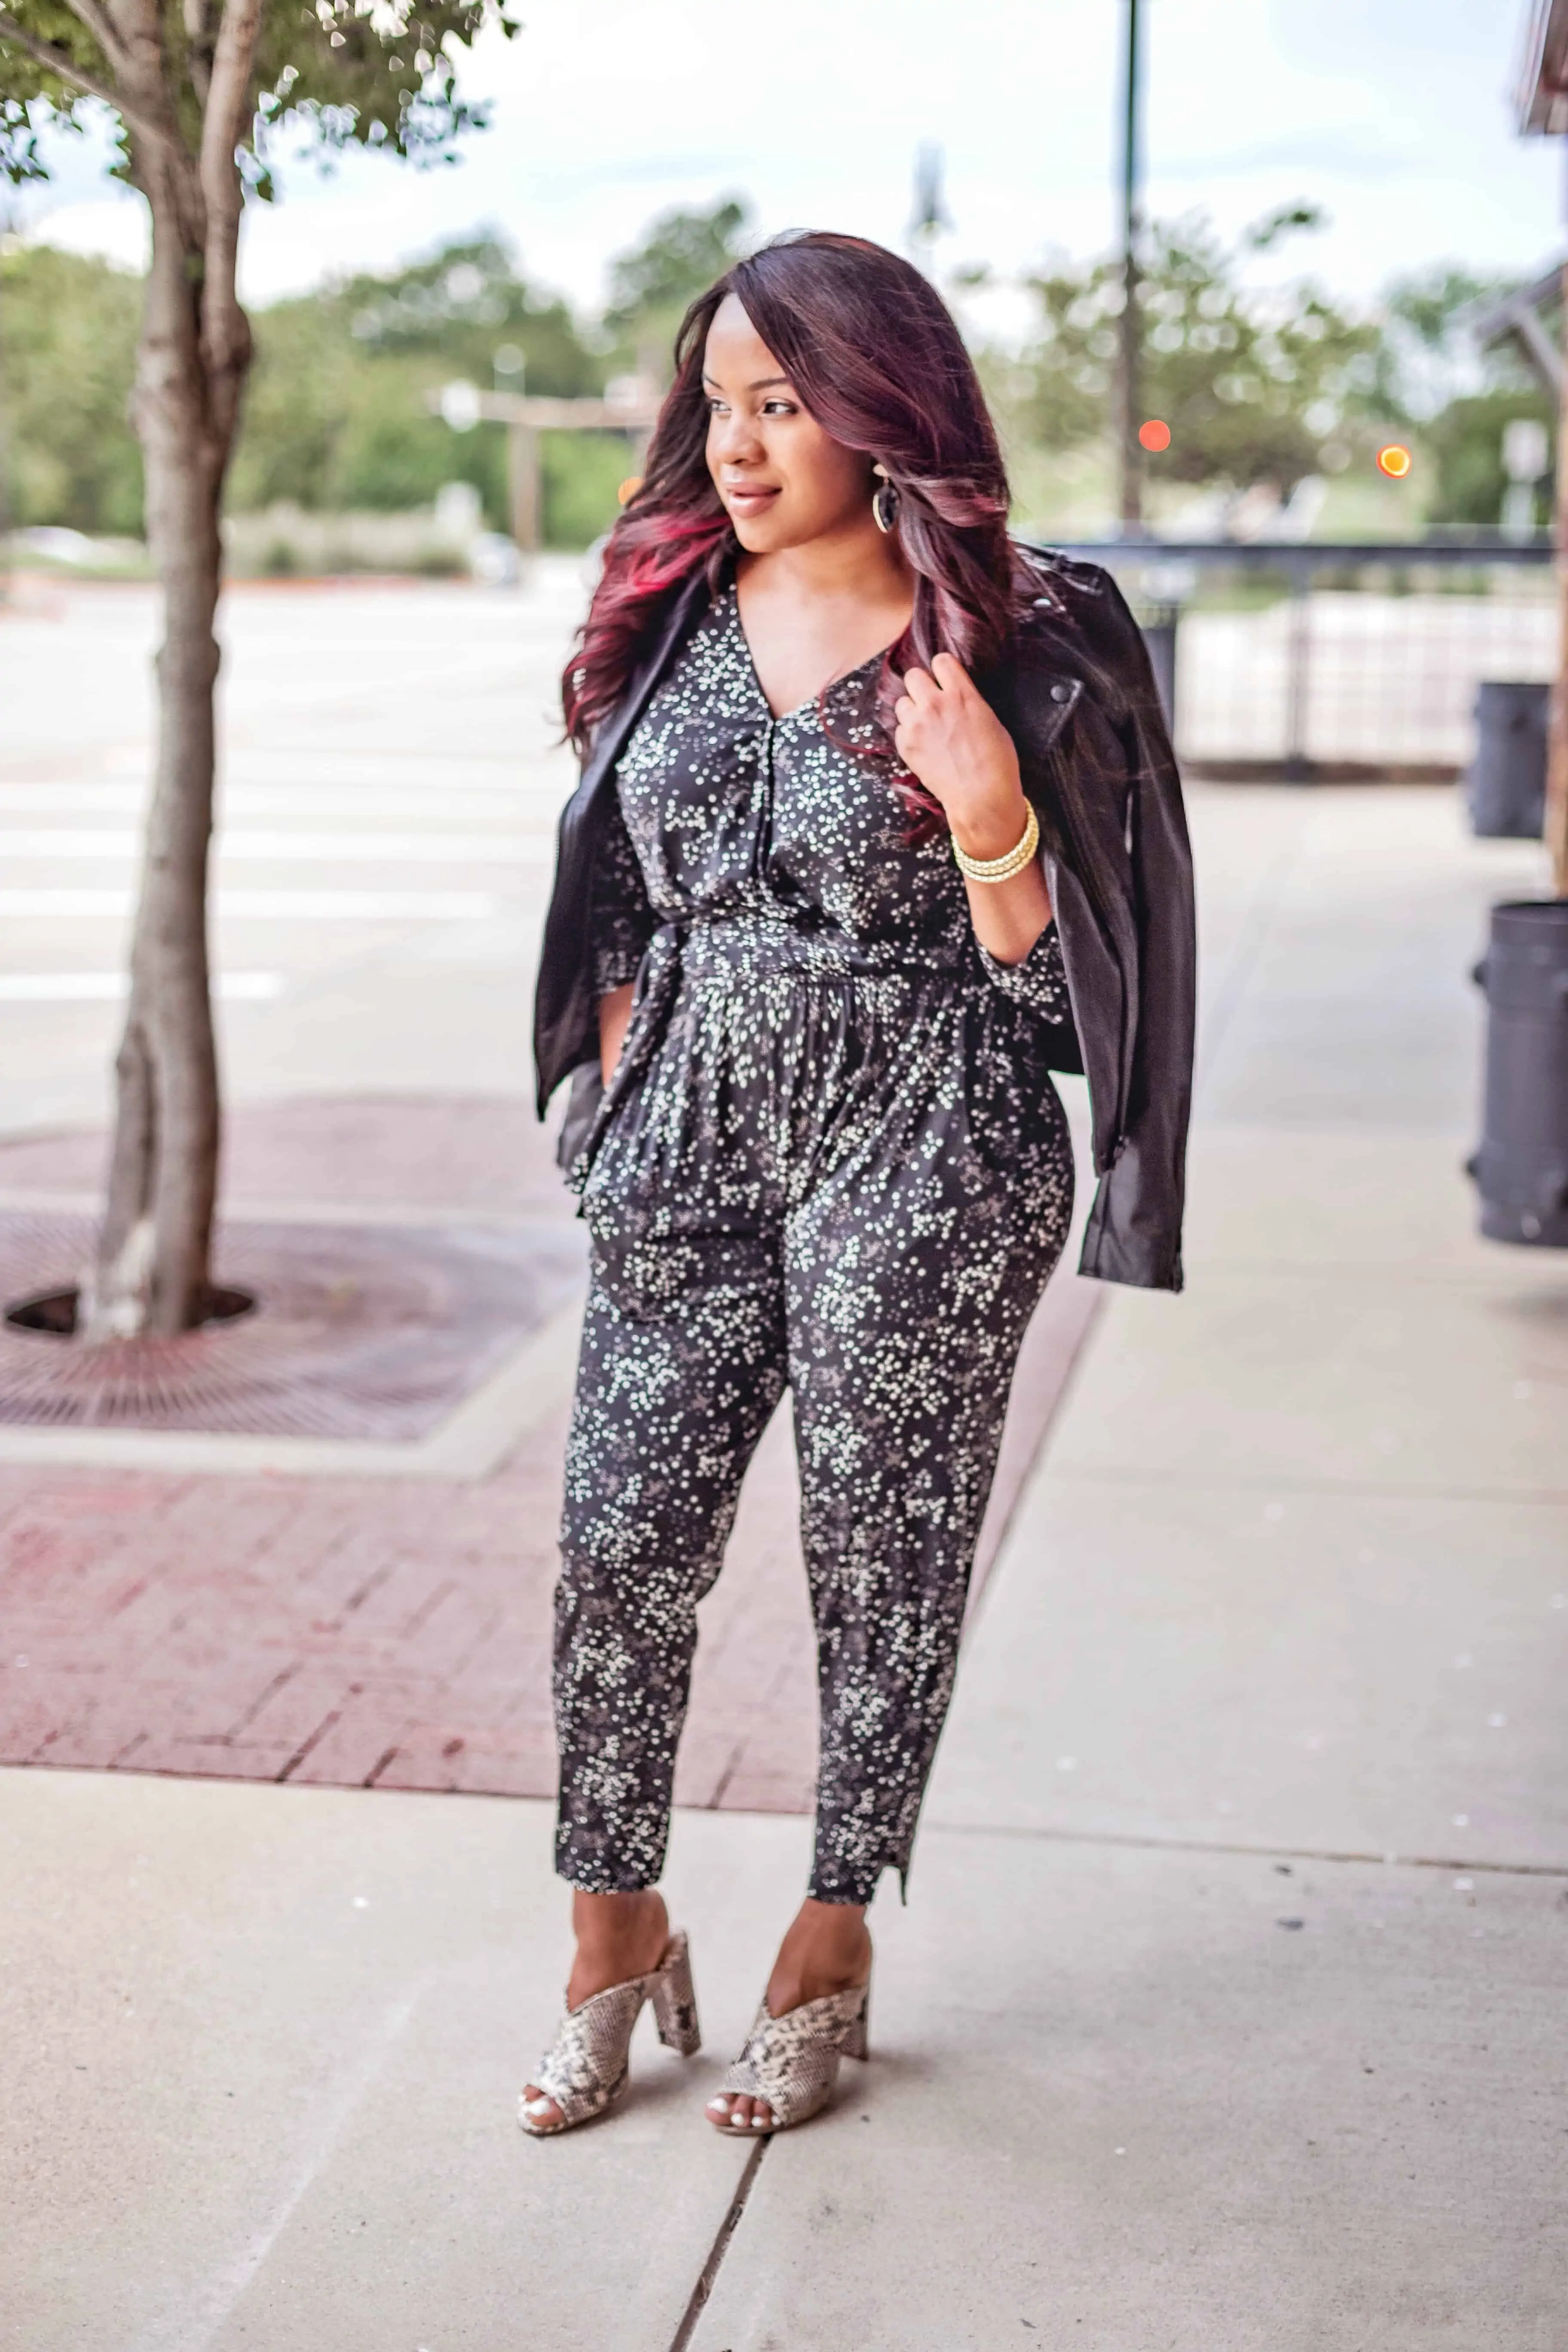 Have you ever considered boosting your confidence just in time for Fall? Dallas Lifestyle Blogger Glamorous Versatility is sharing why you should start now! 